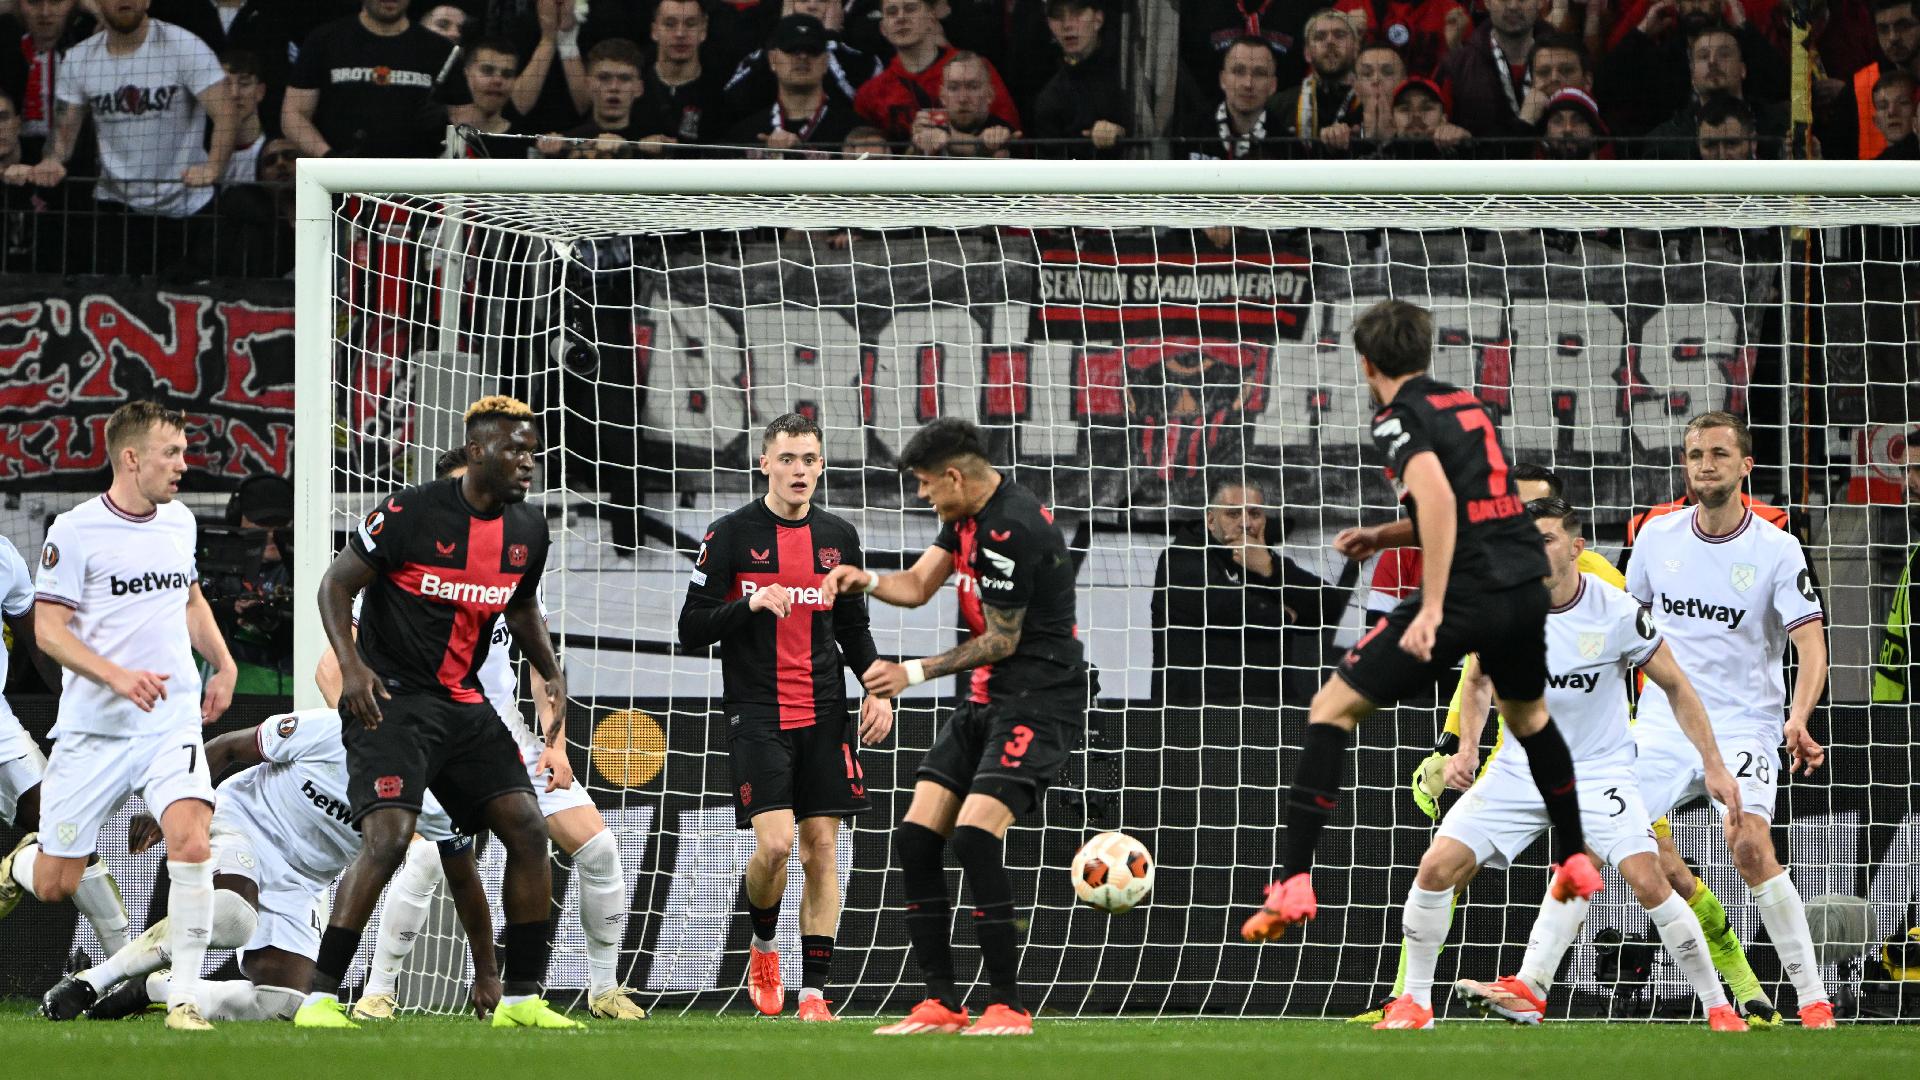 West Ham left with tough task in Europa League after defeat to Bayer Leverkusen